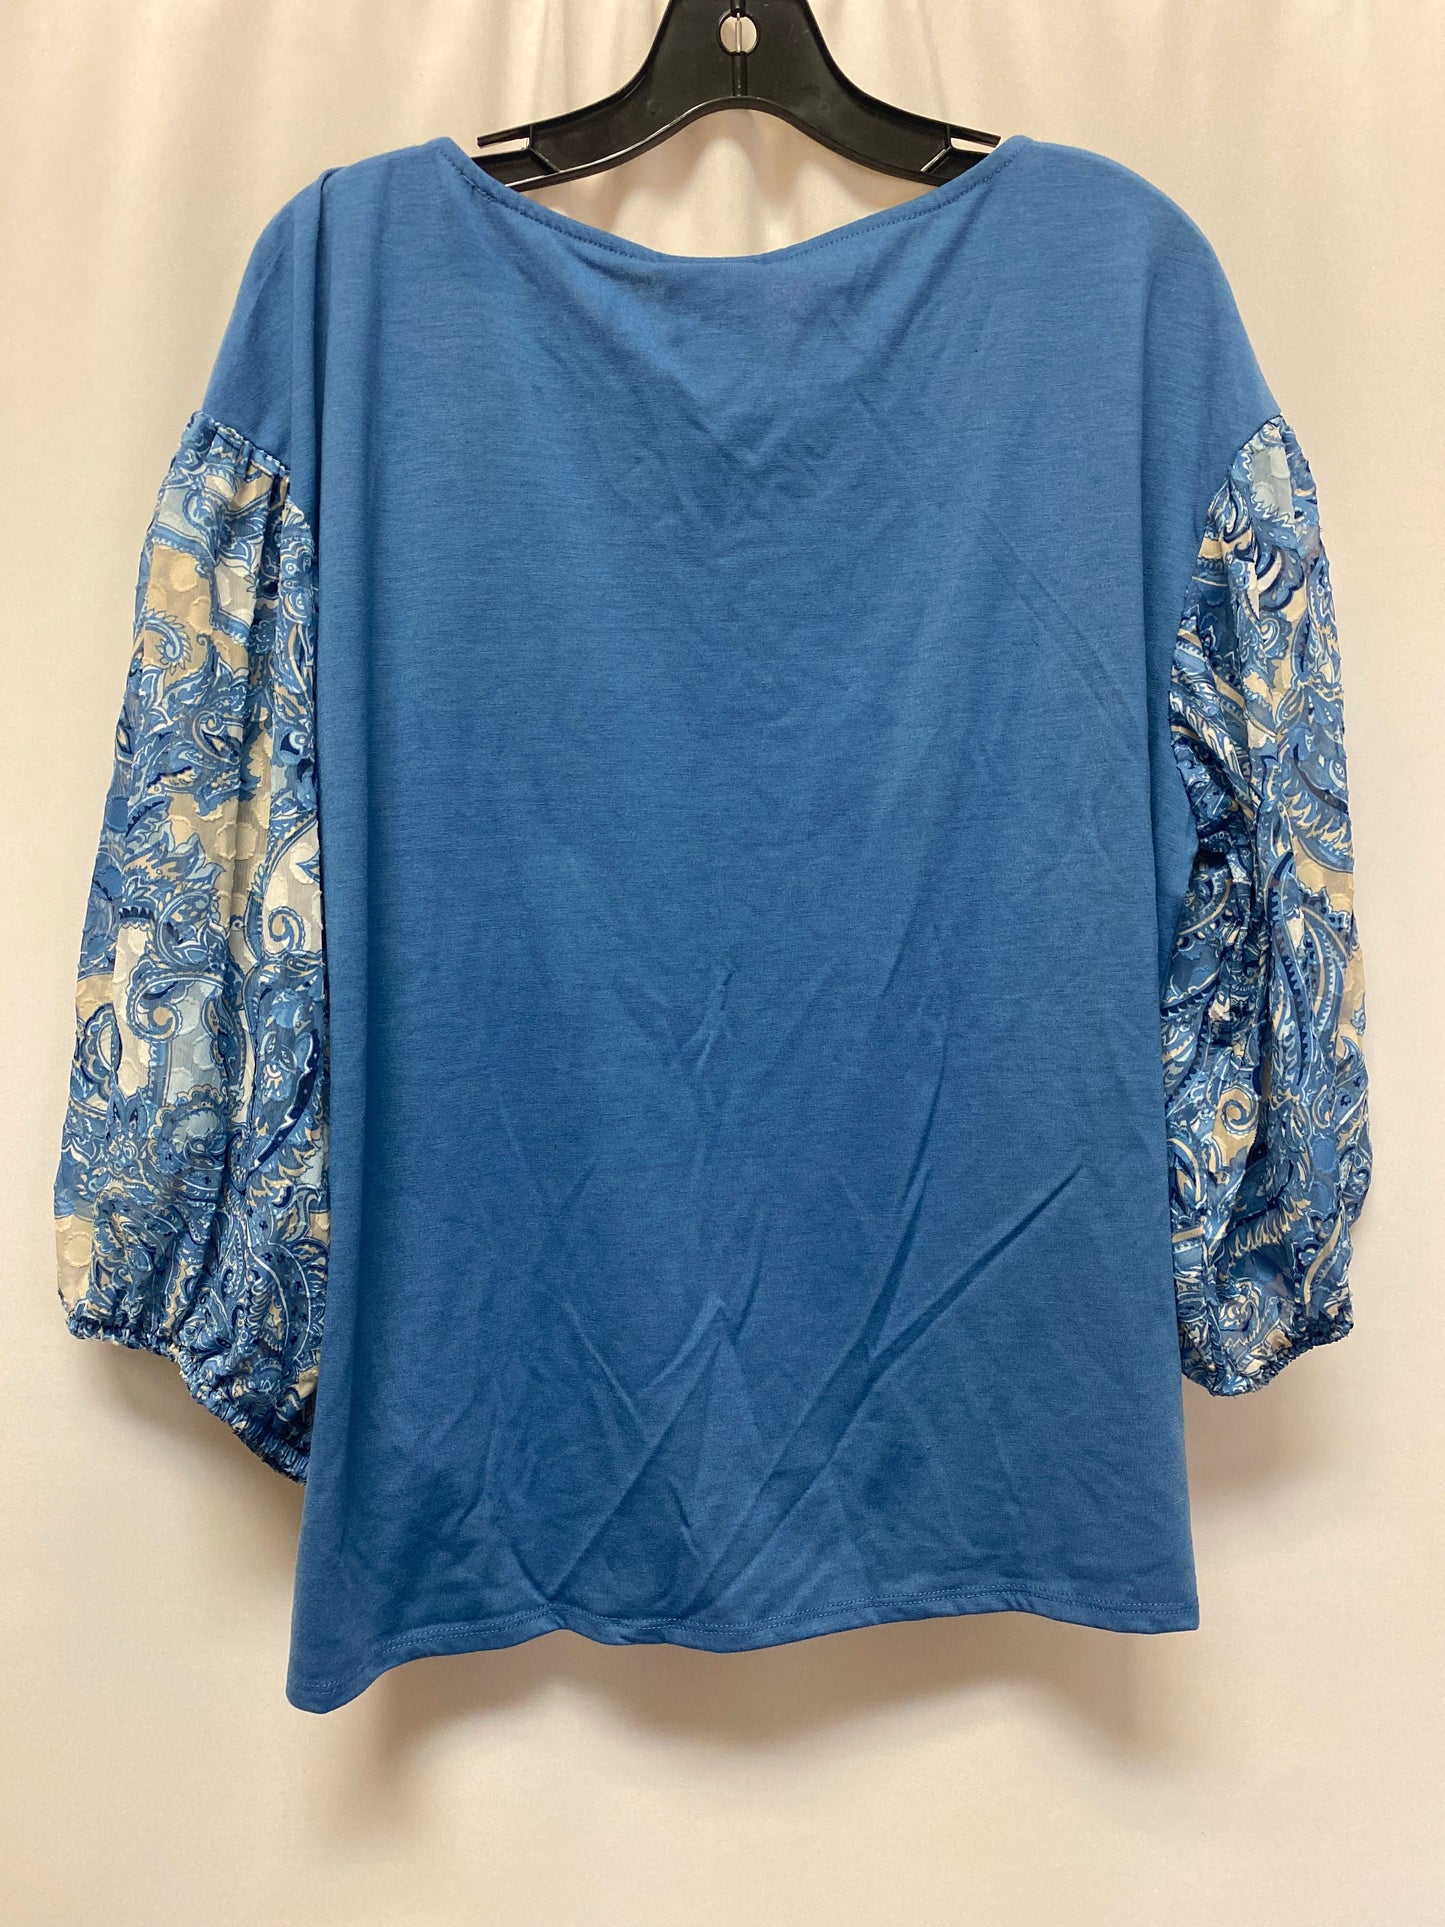 Blue Top Long Sleeve Ruby Rd, Size L